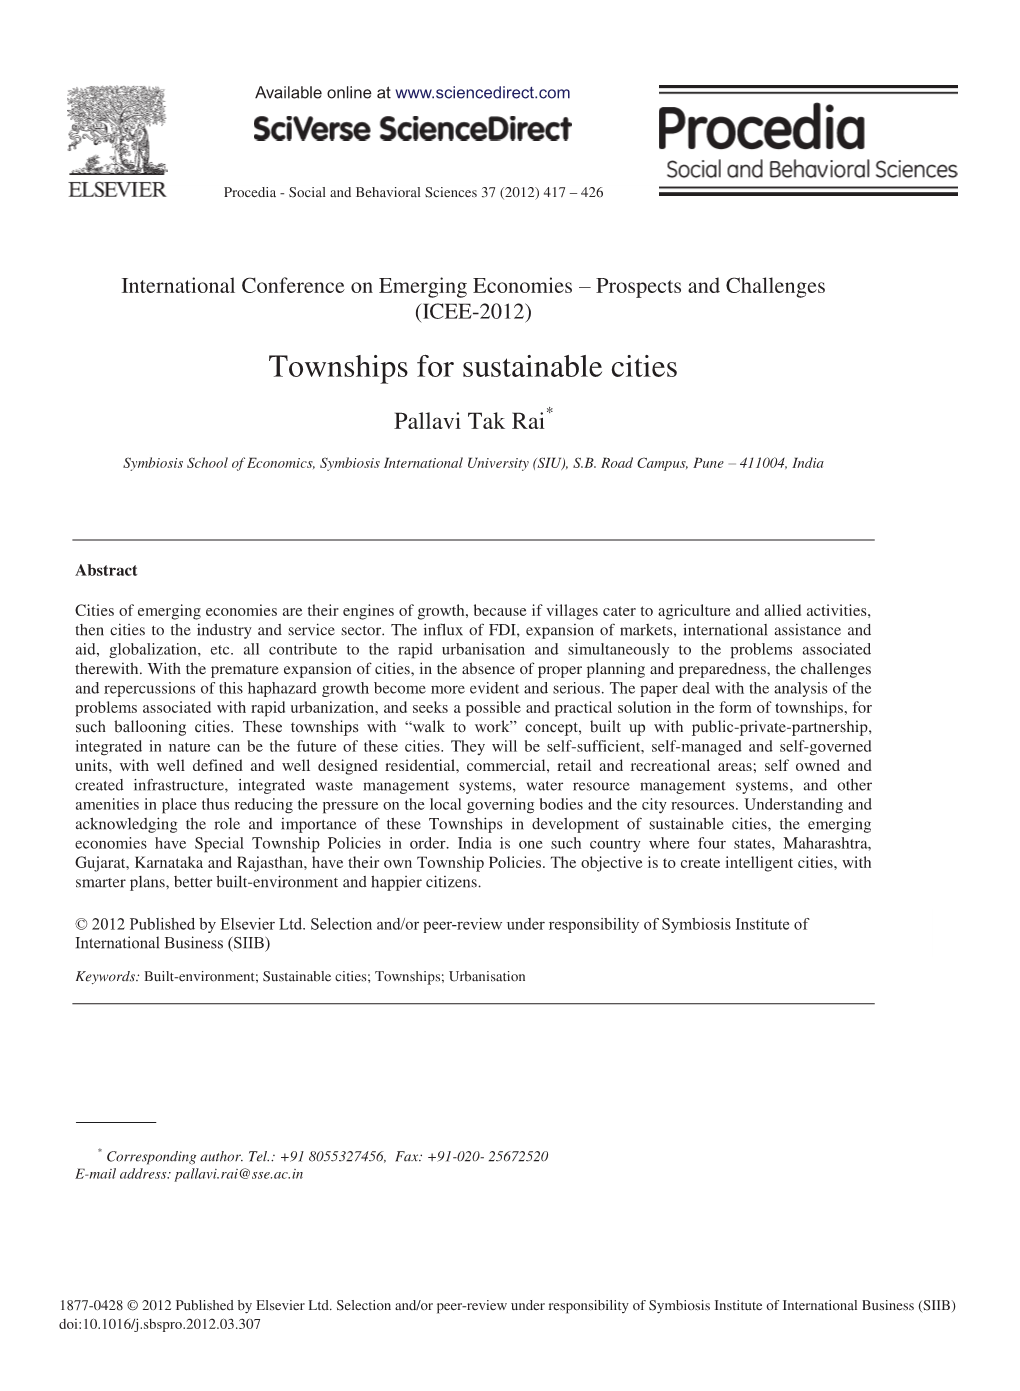 Townships for Sustainable Cities